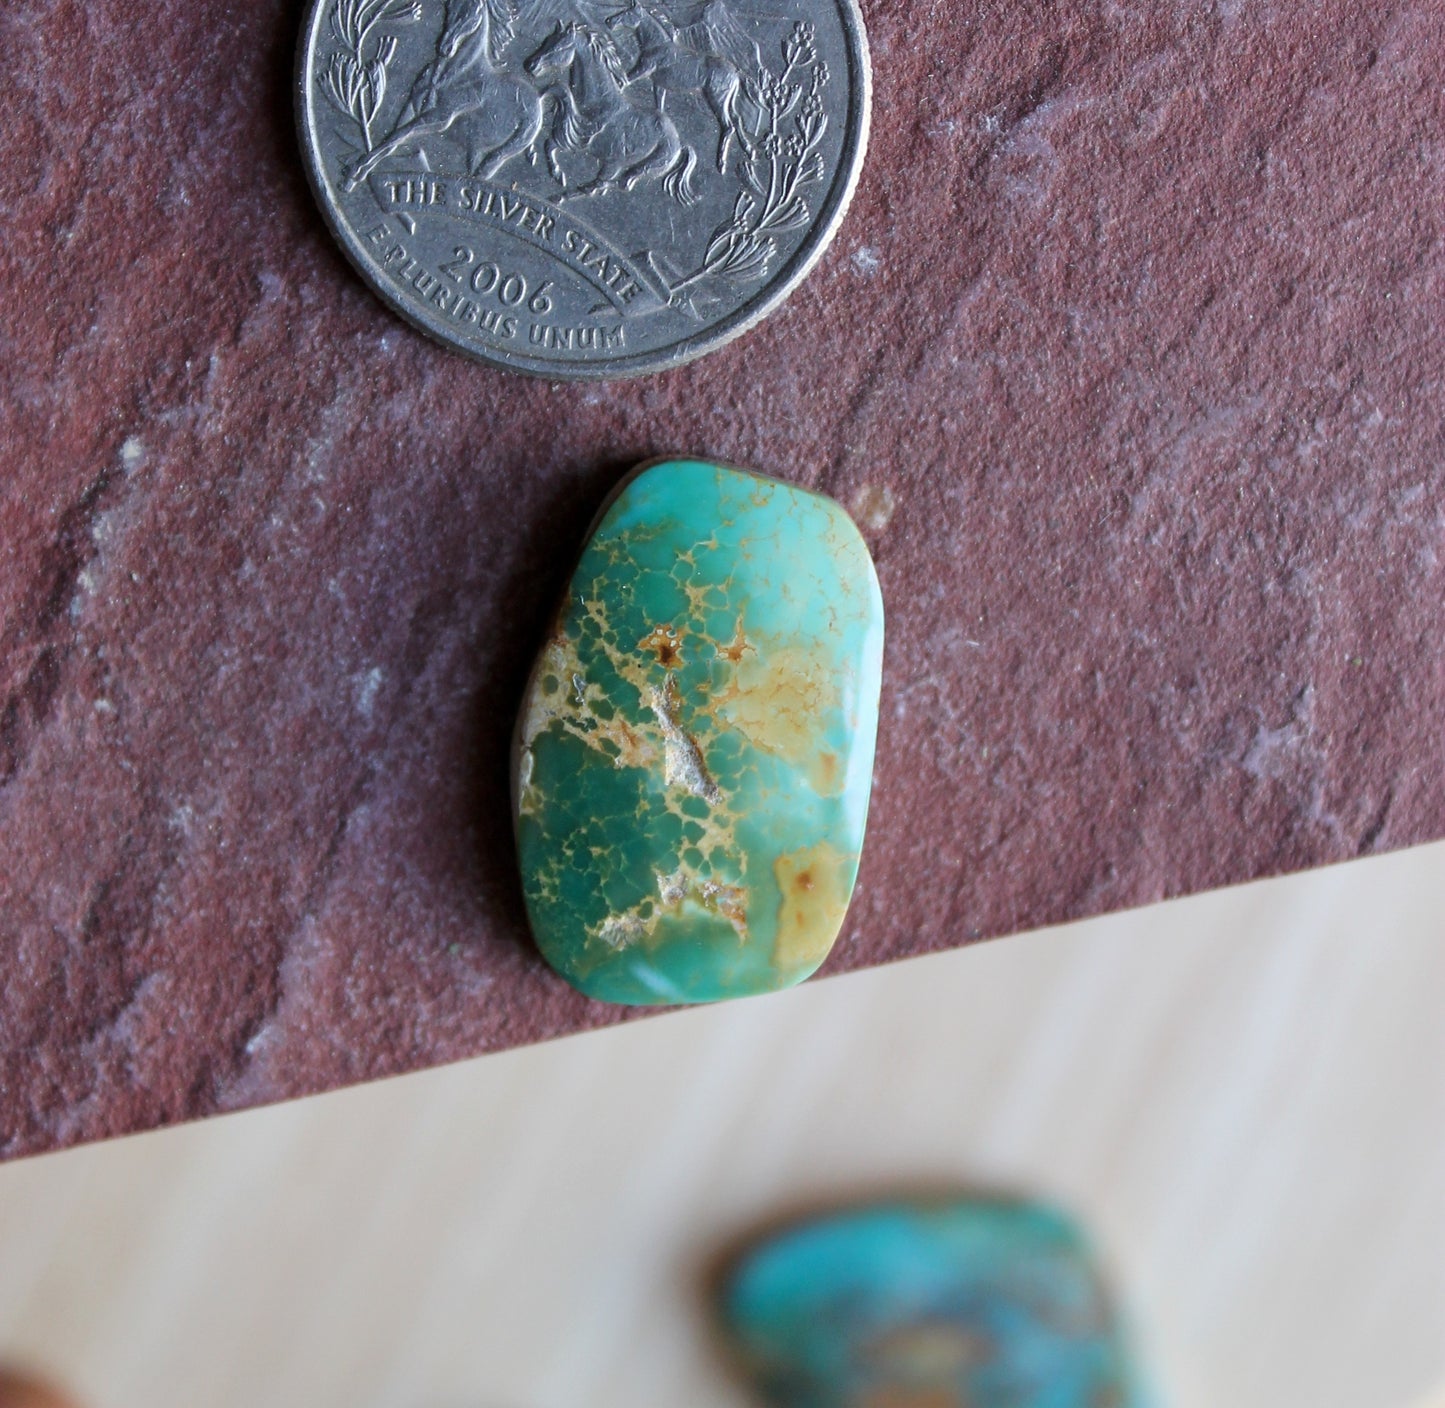 12 carat green Stone Mountain Turquoise cabochon